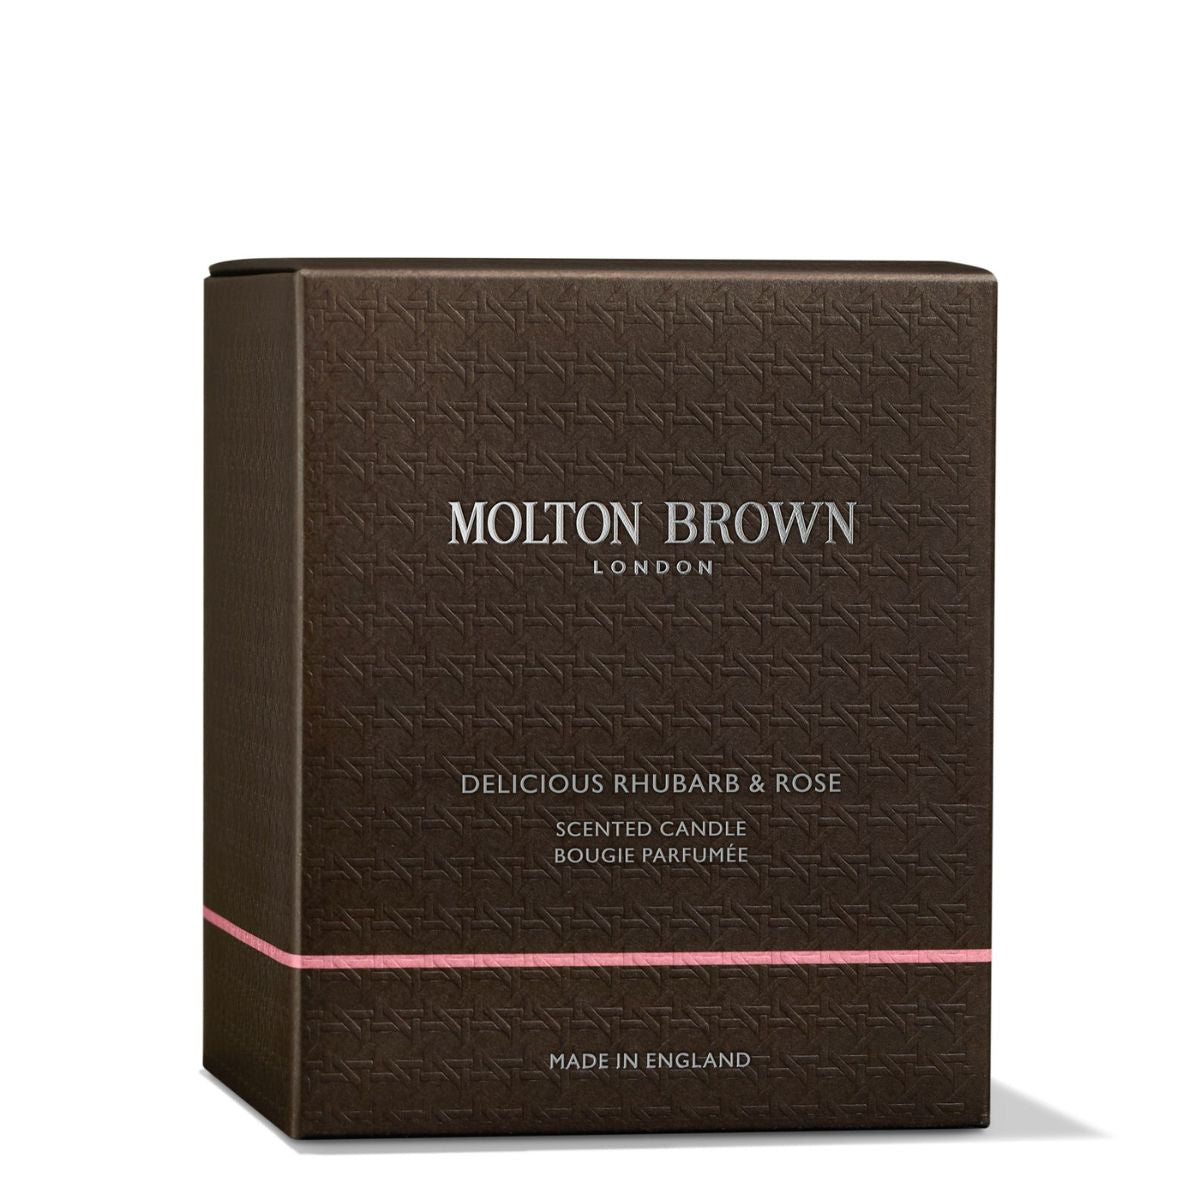 Molton Brown Delicious Rhubarb & Rose Signature Scented Single Wick Candle.